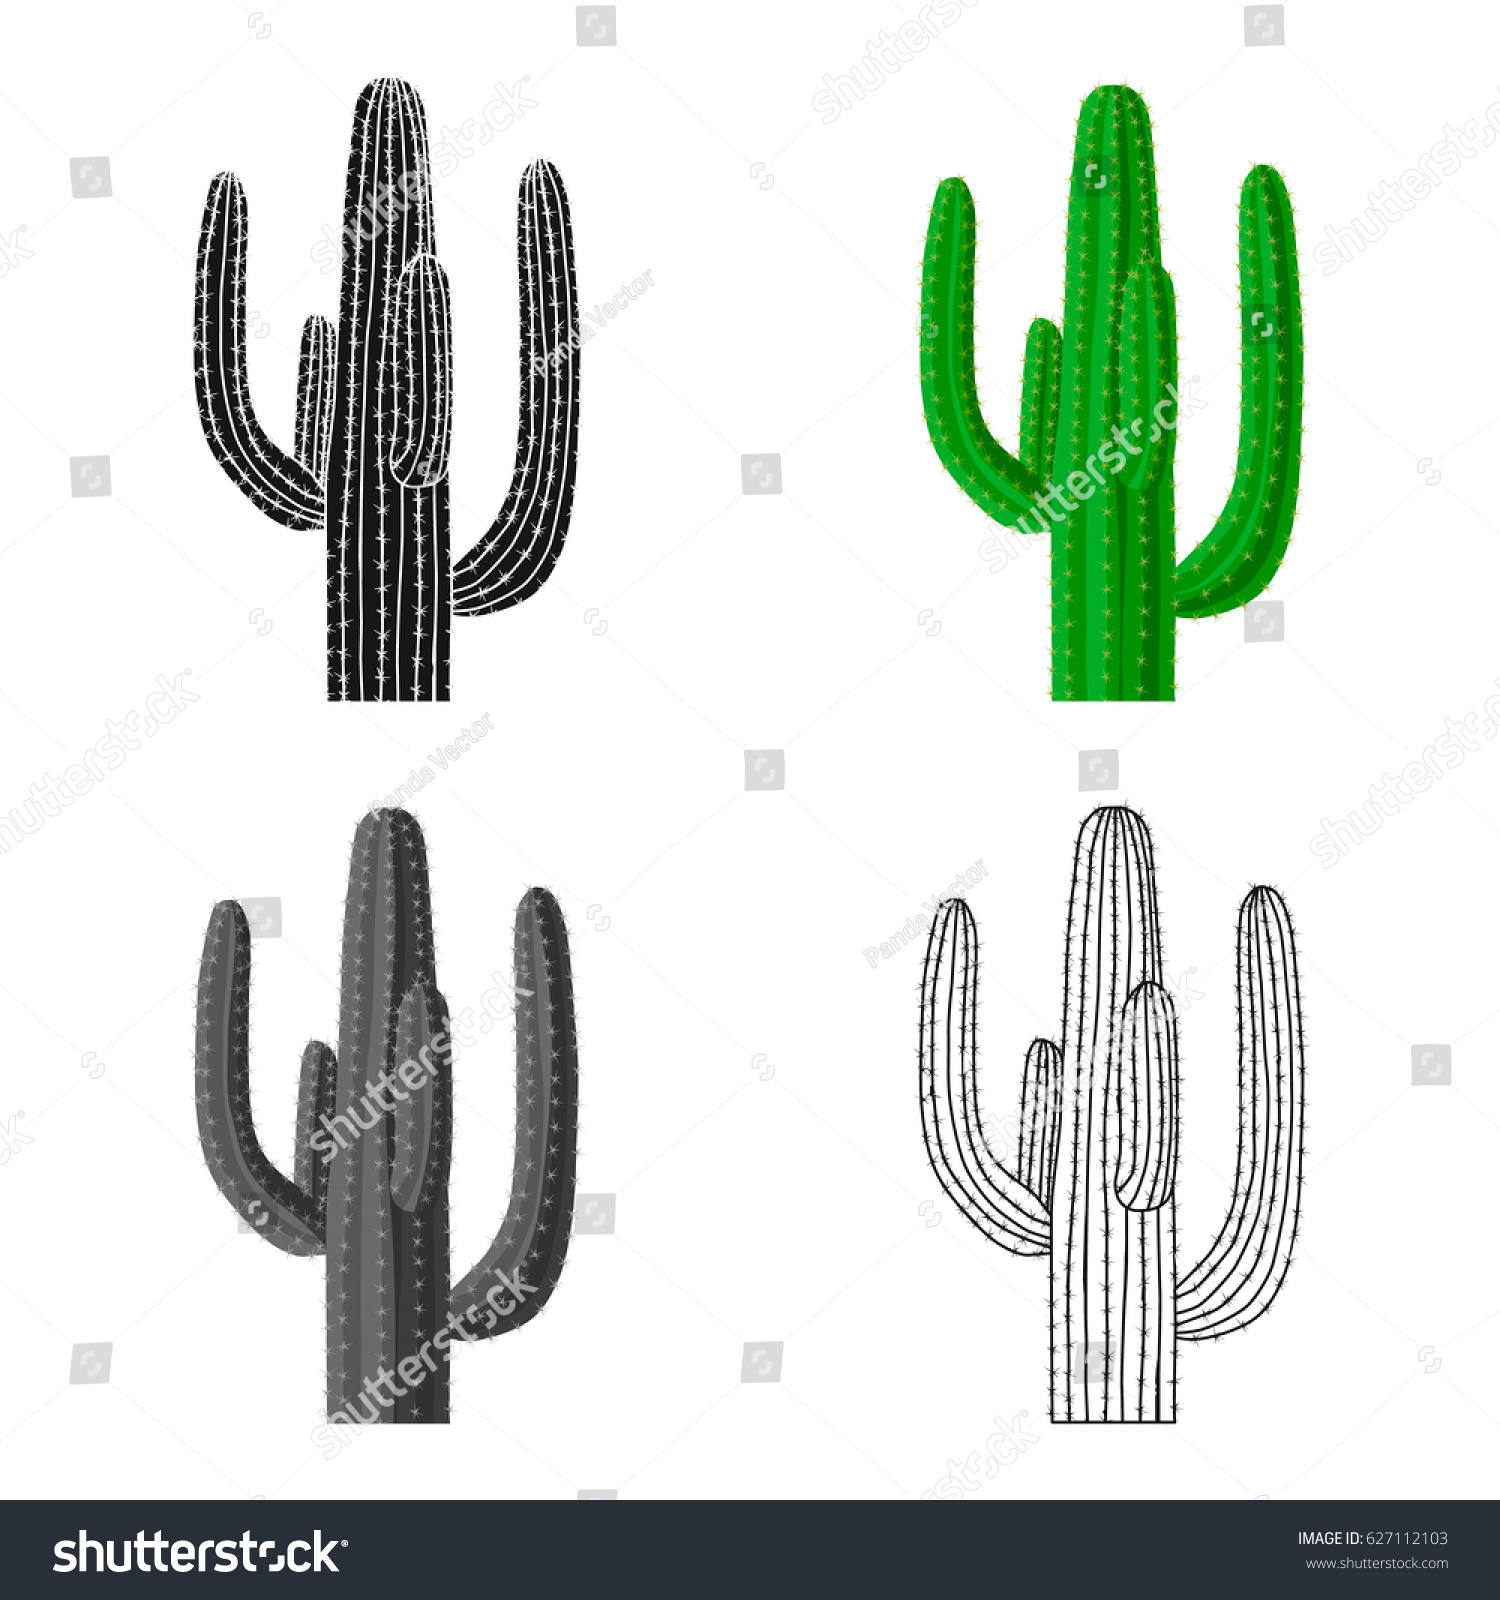 SVG of Mexican cactus icon in cartoon style isolated on white background. Mexico country symbol stock vector illustration. svg